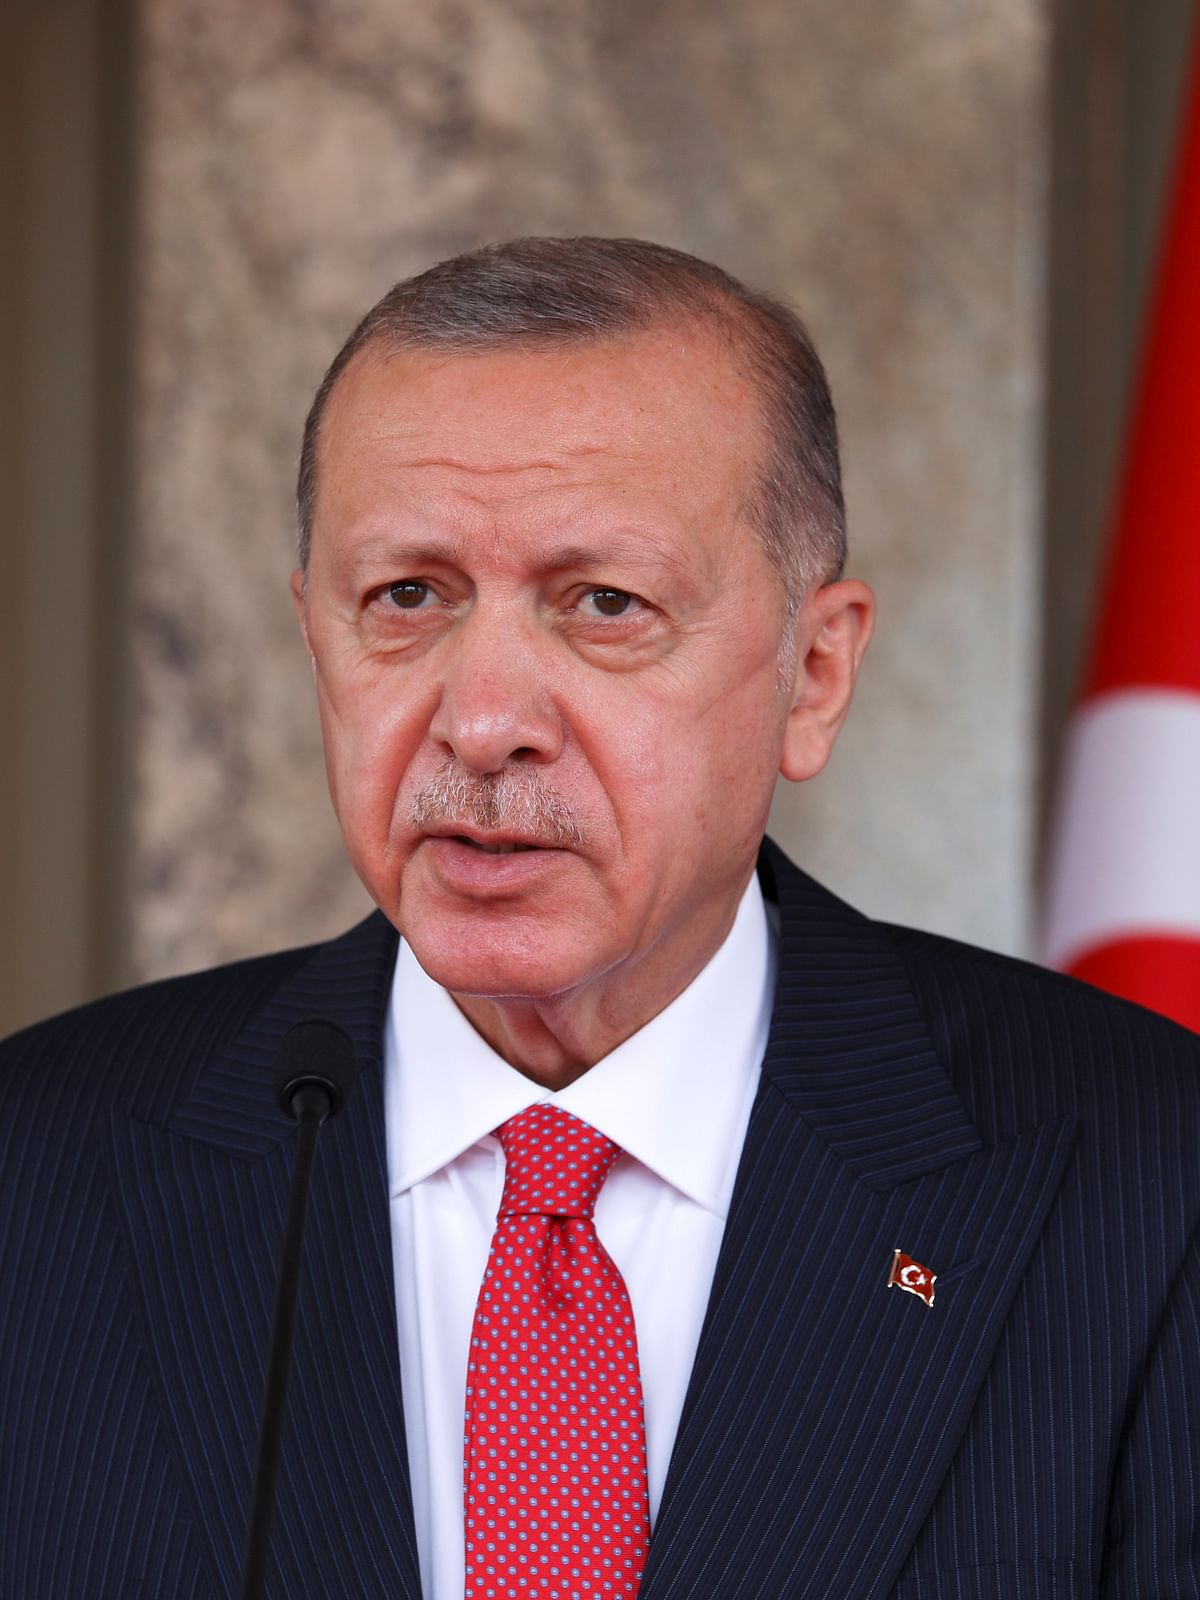 Turkish President Recep Tayyip Erdogan will also attend the G7 summit and will hold meetings on the sidelines of the summit.